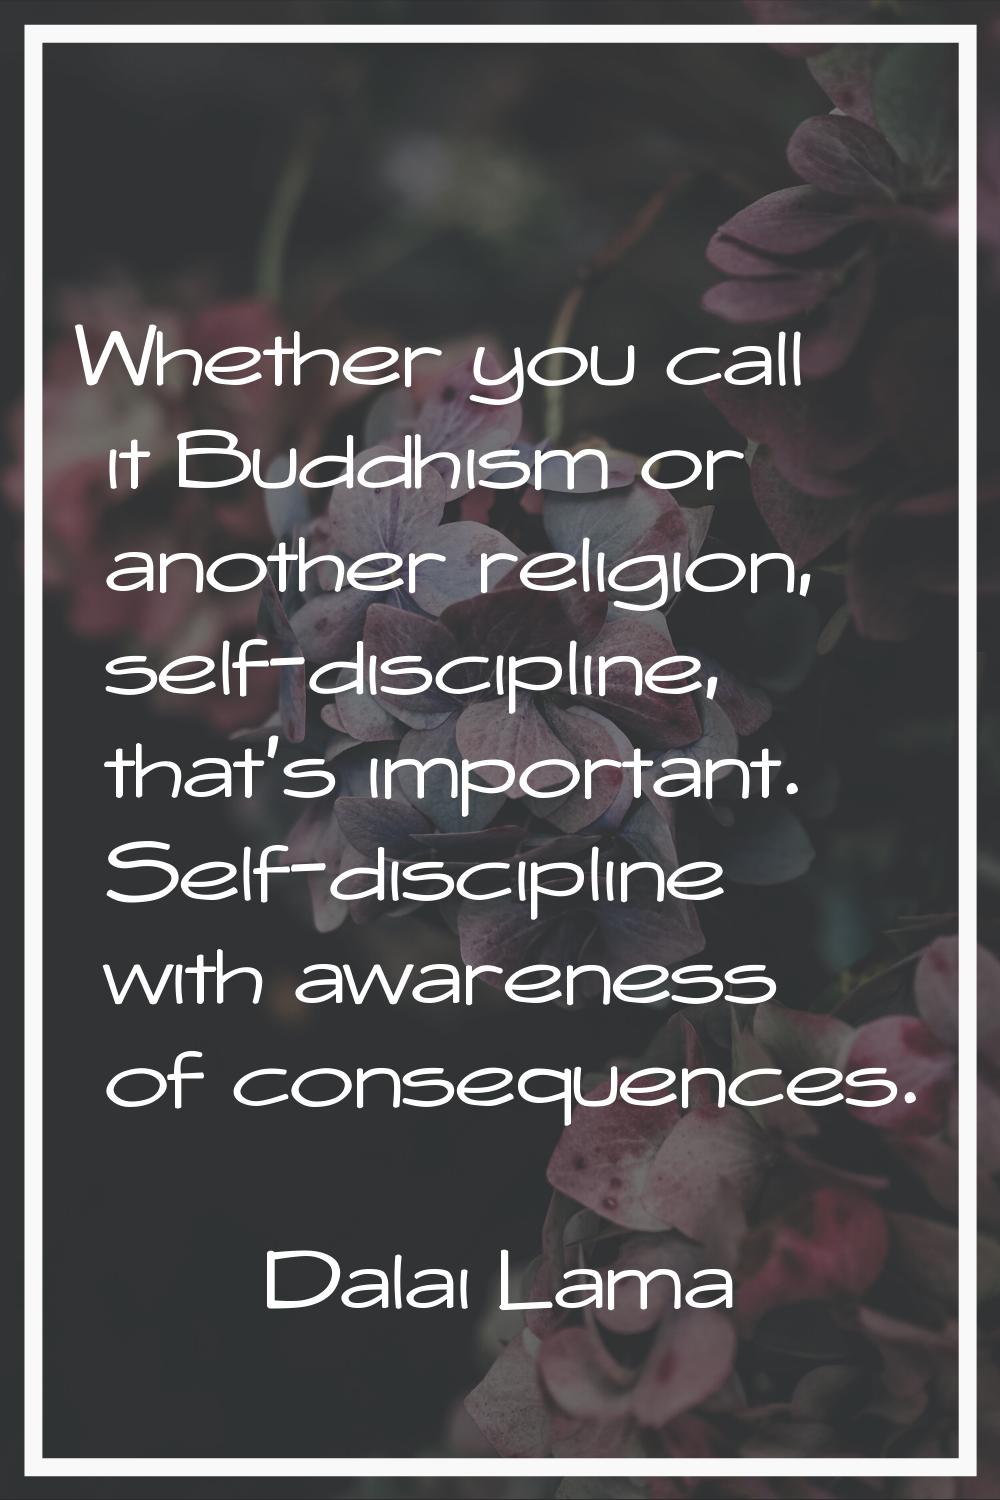 Whether you call it Buddhism or another religion, self-discipline, that's important. Self-disciplin